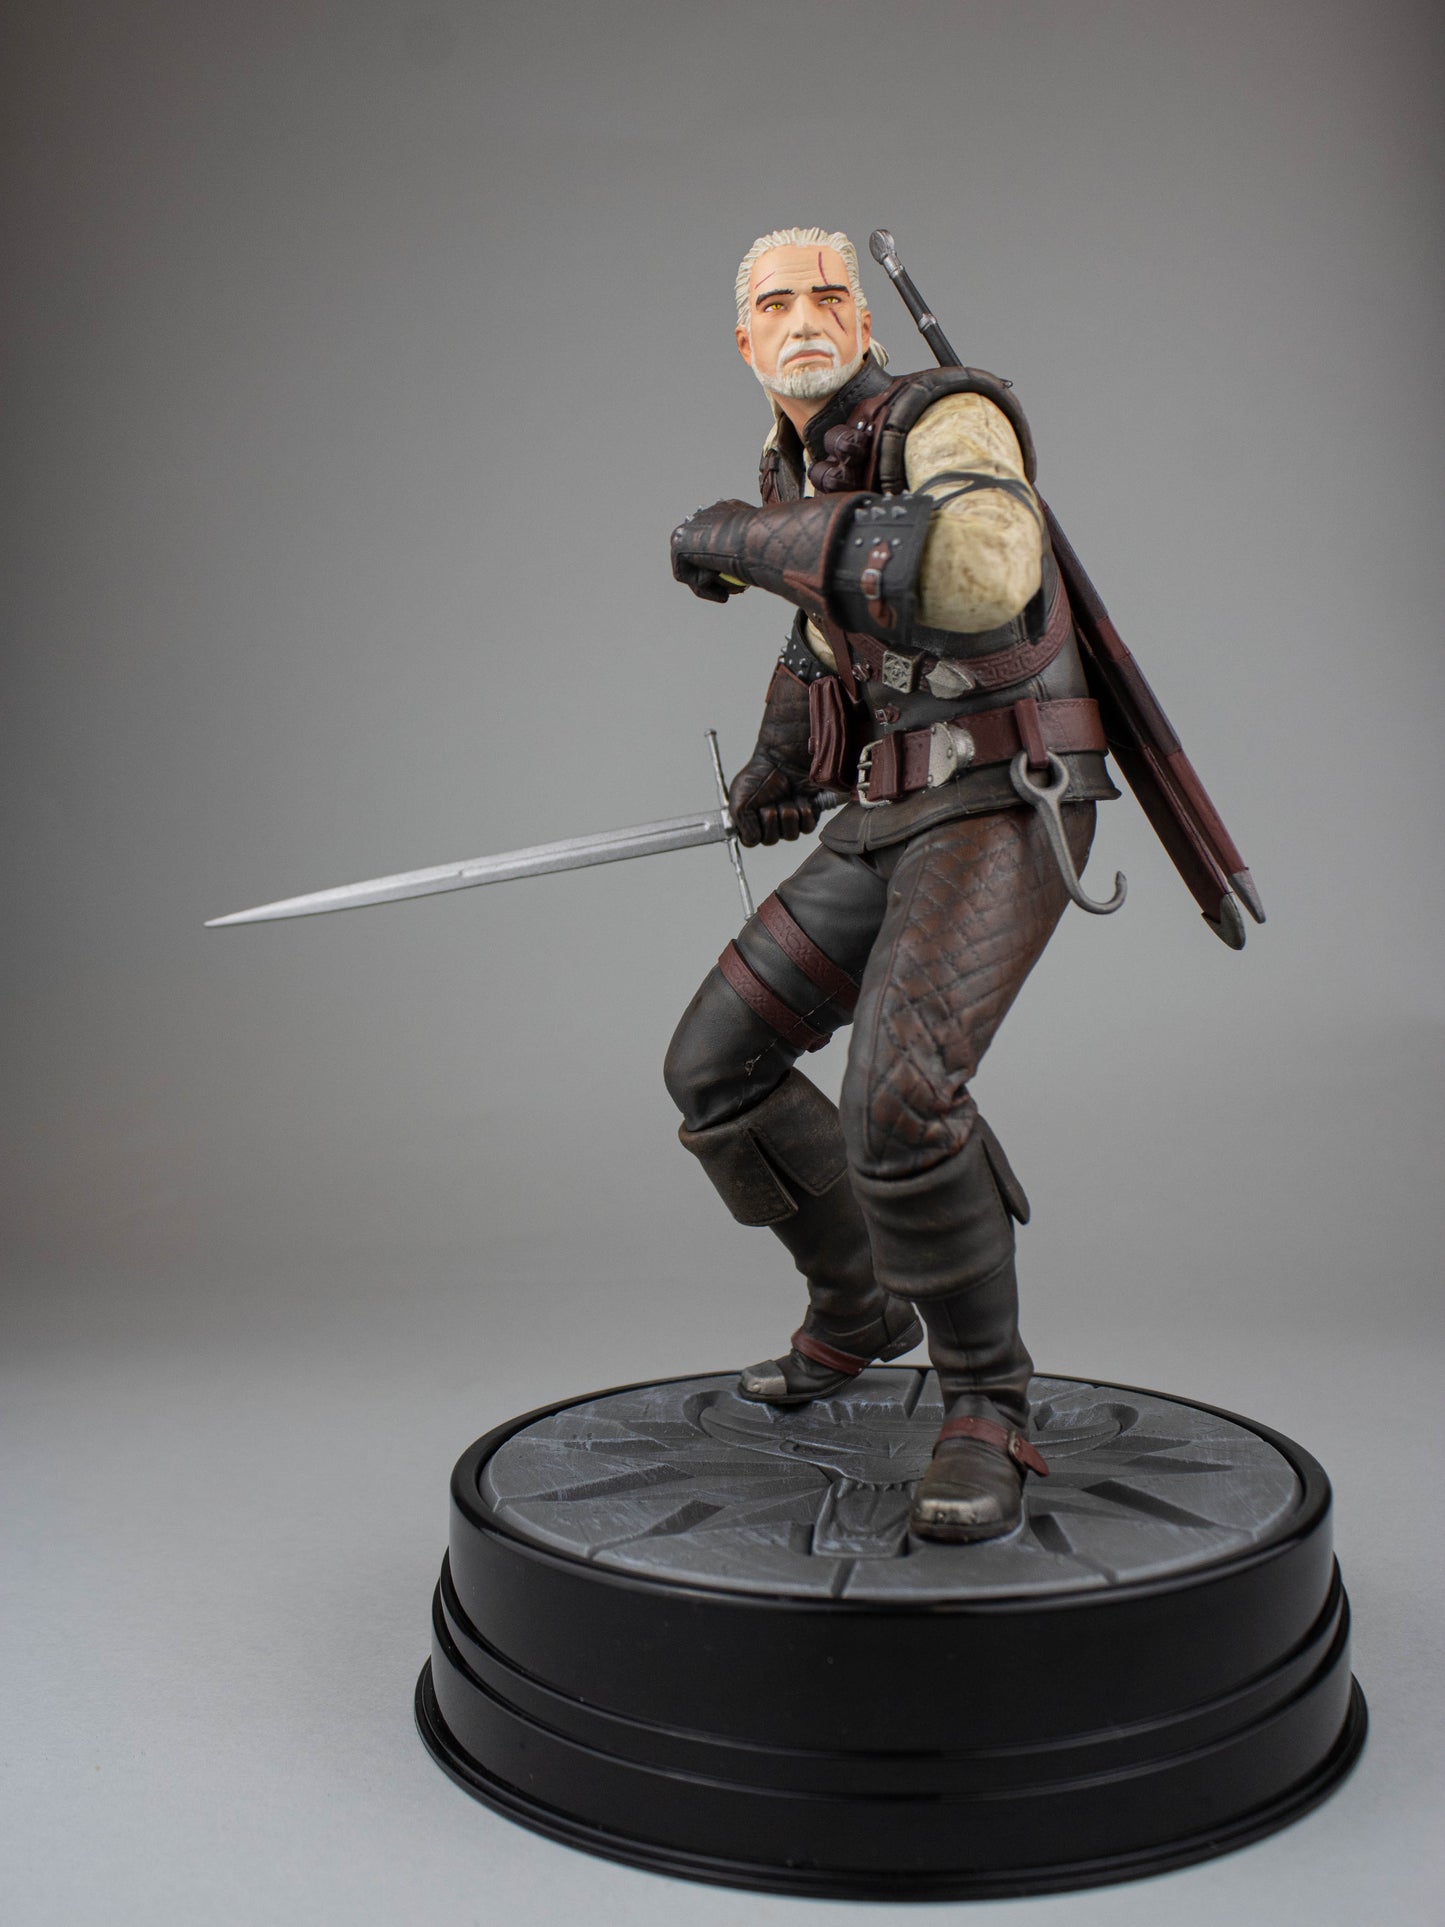 Geralt of Rivia (Manticore Armor) The Witcher: Wild Hunt Statue